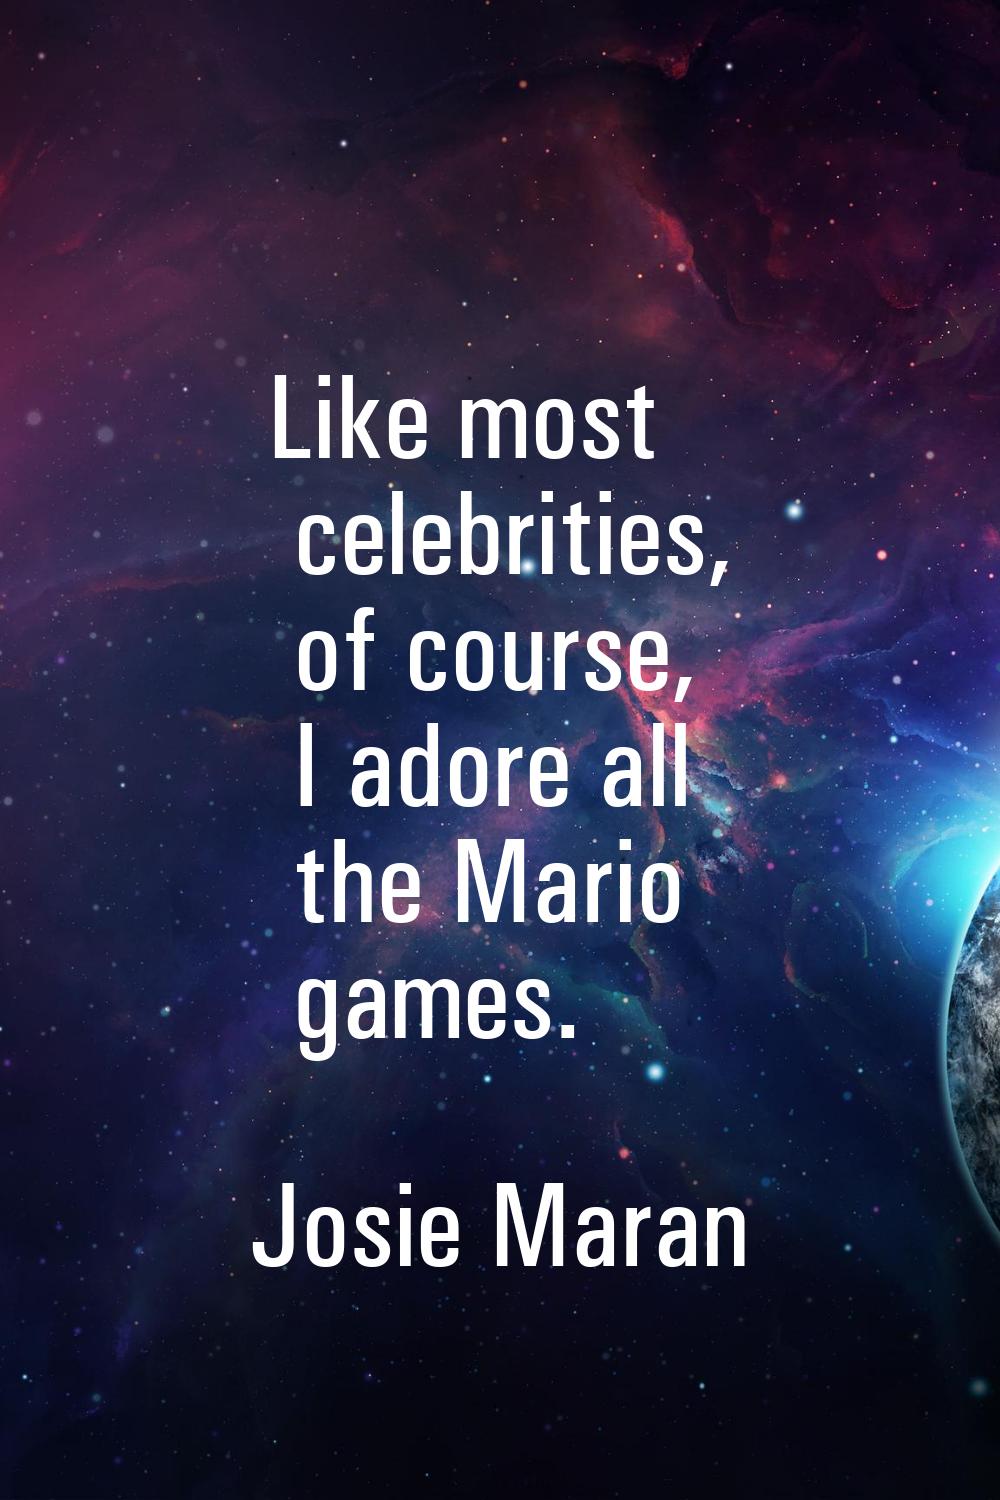 Like most celebrities, of course, I adore all the Mario games.